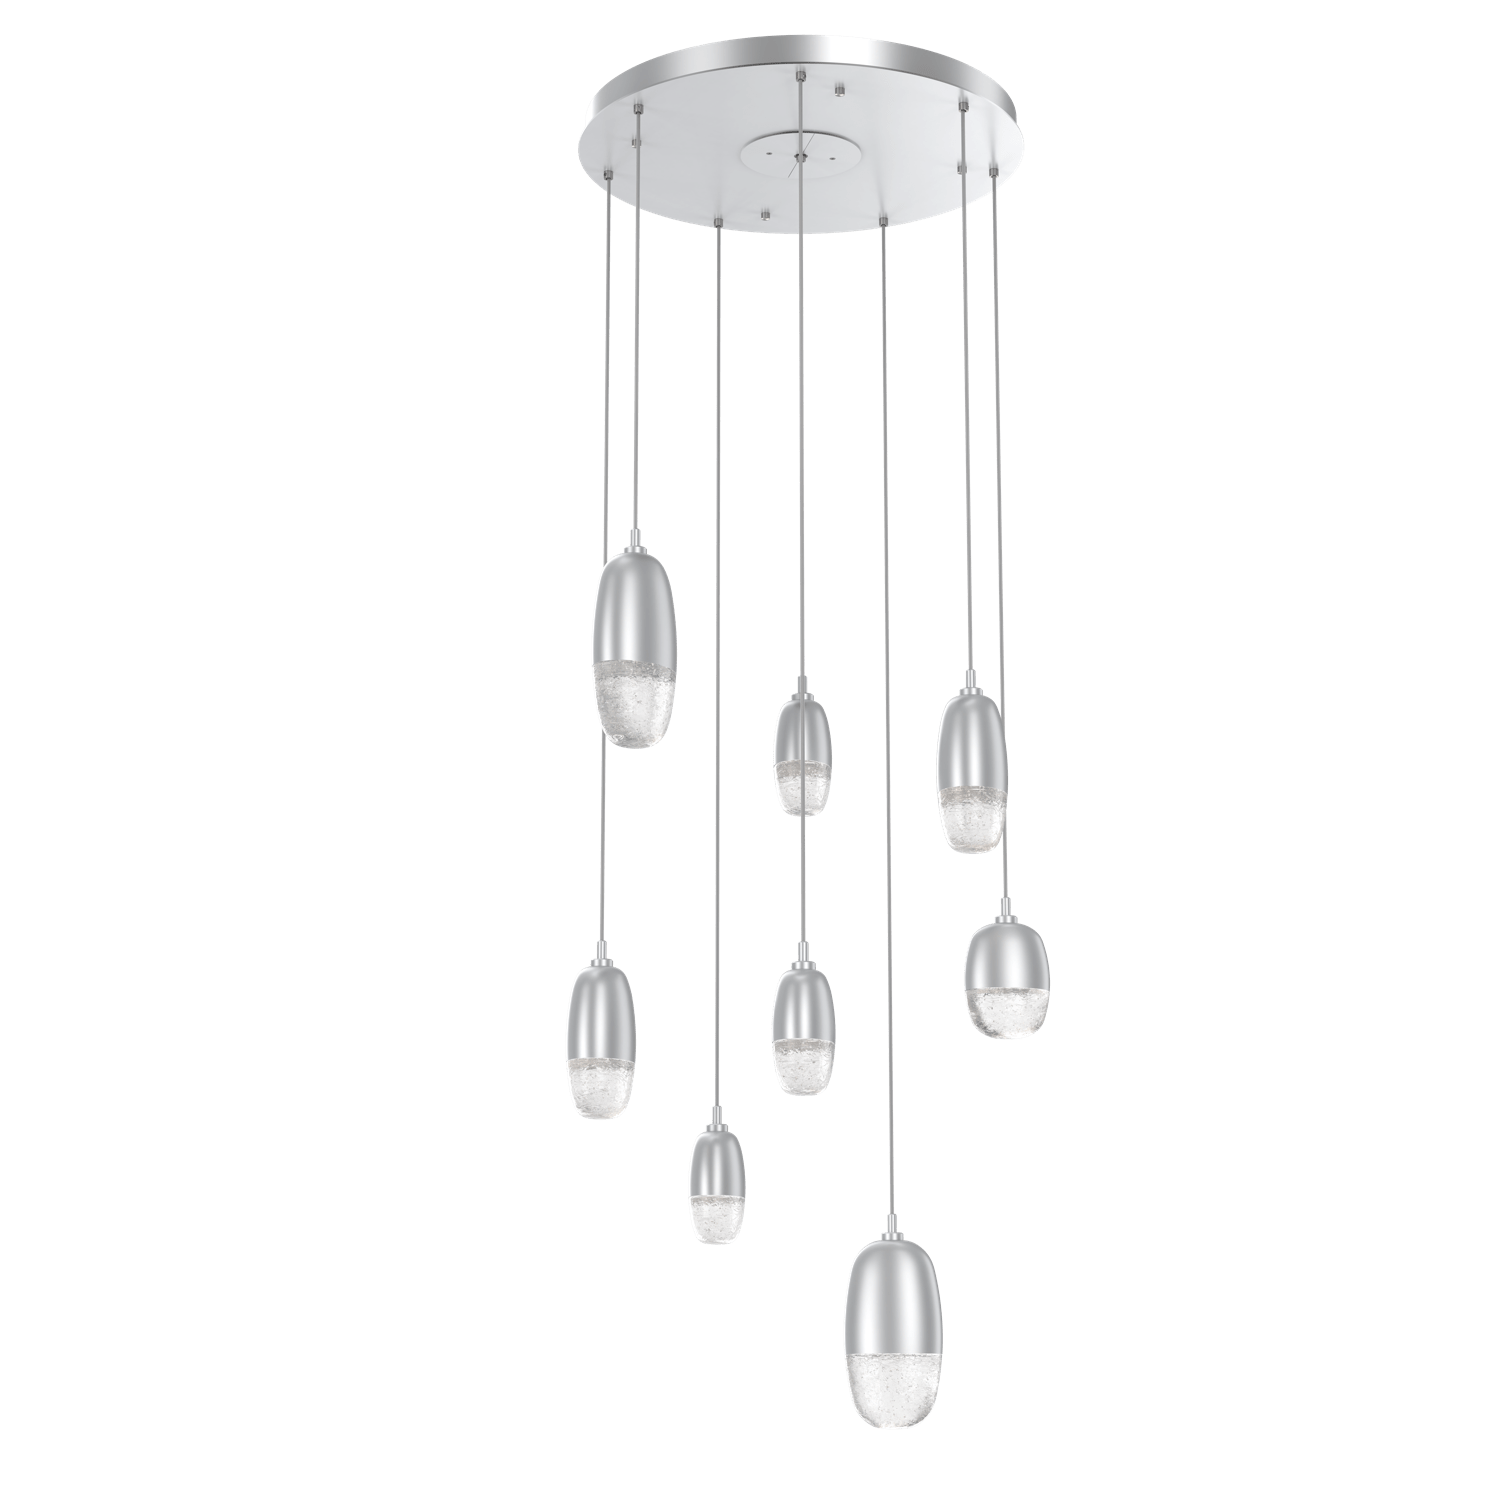 CHB0079-08-CS-Hammerton-Studio-Pebble-8-light-round-pendant-chandelier-with-classic-silver-finish-and-clear-cast-glass-shades-and-LED-lamping